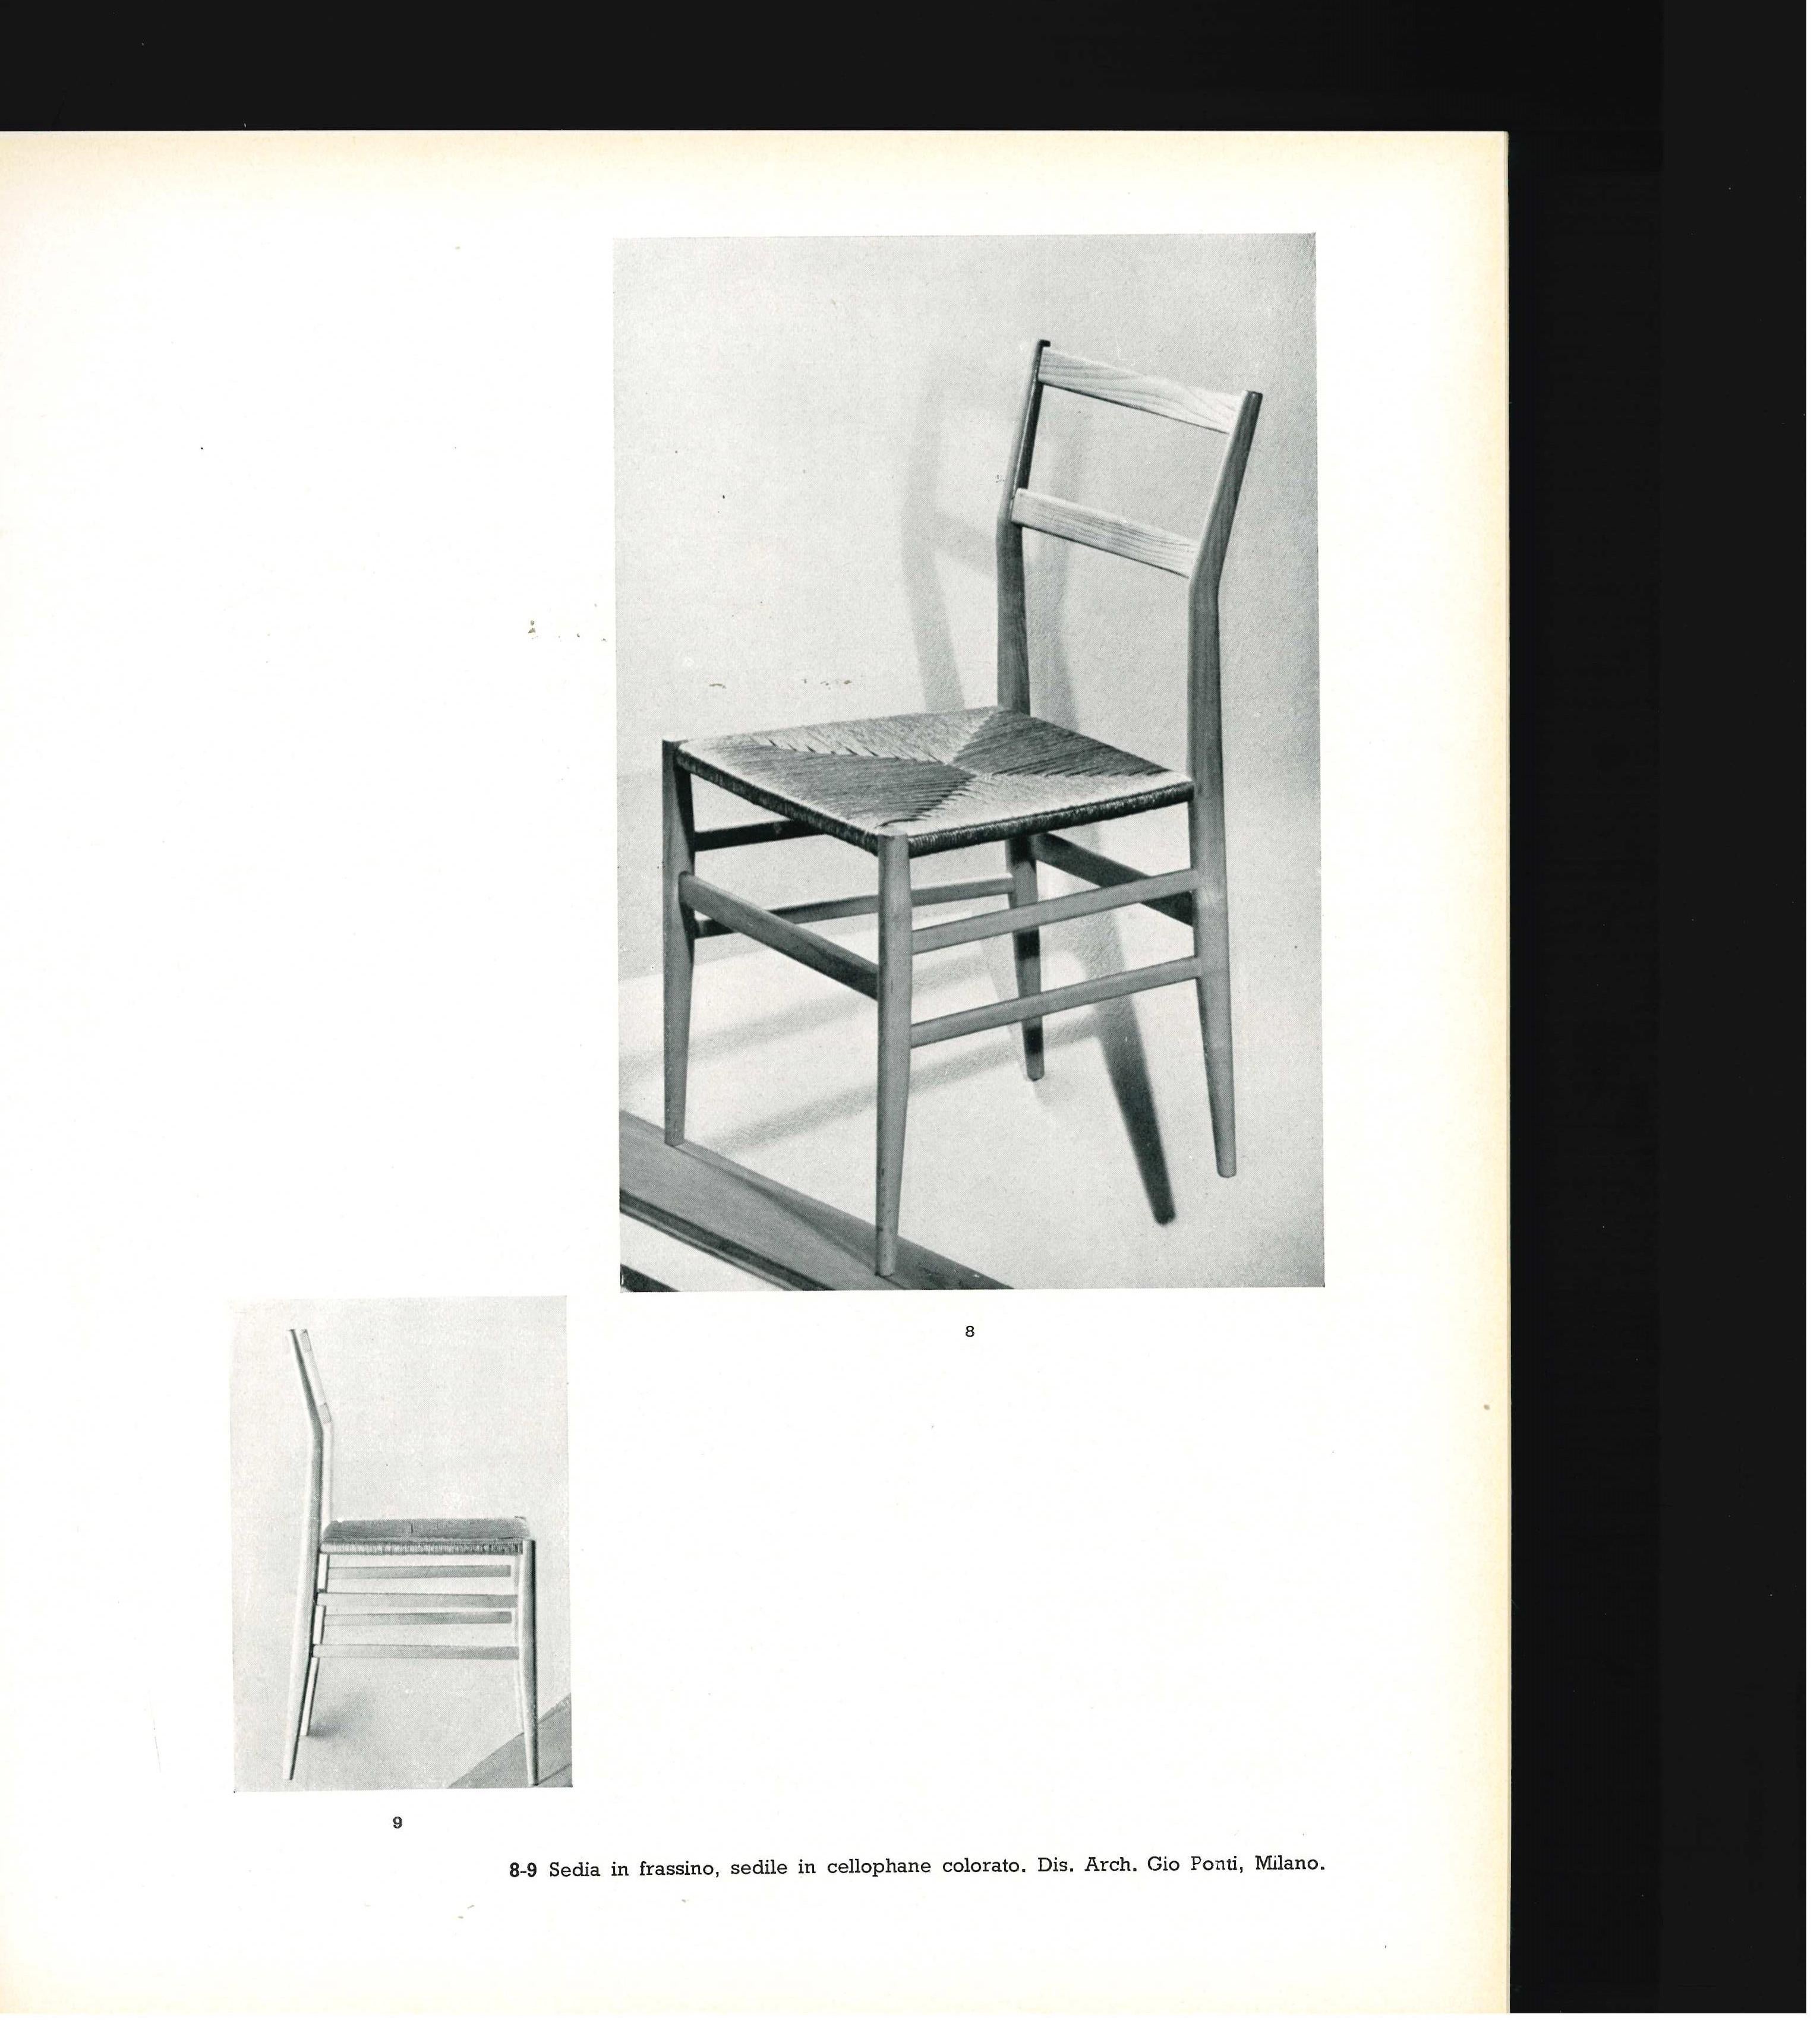 3 Volumes of the Robert Aloi, Esempi Furniture Series (Books) For Sale 4